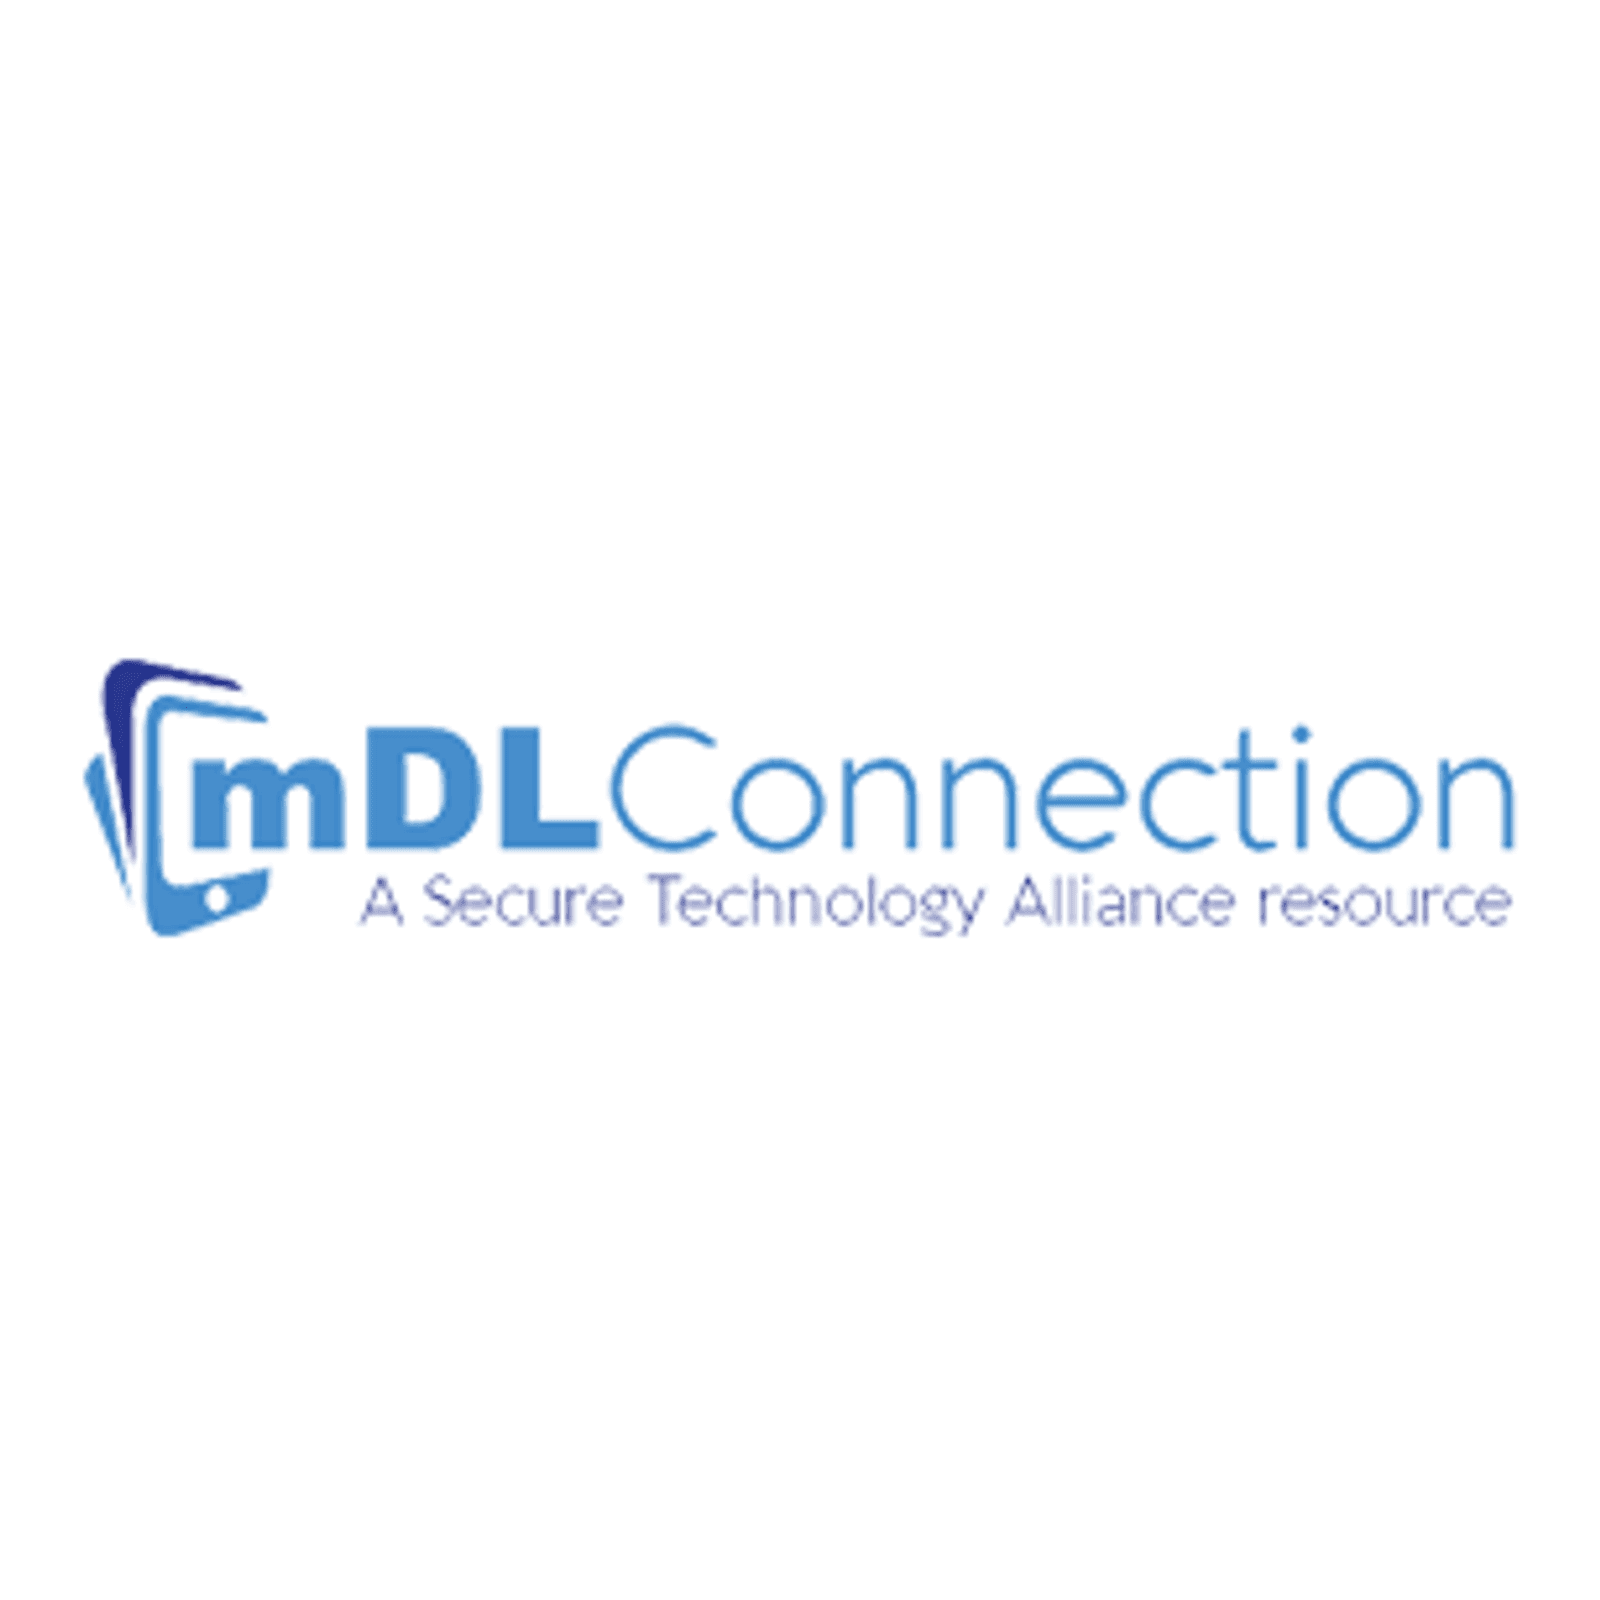 Mdl connection